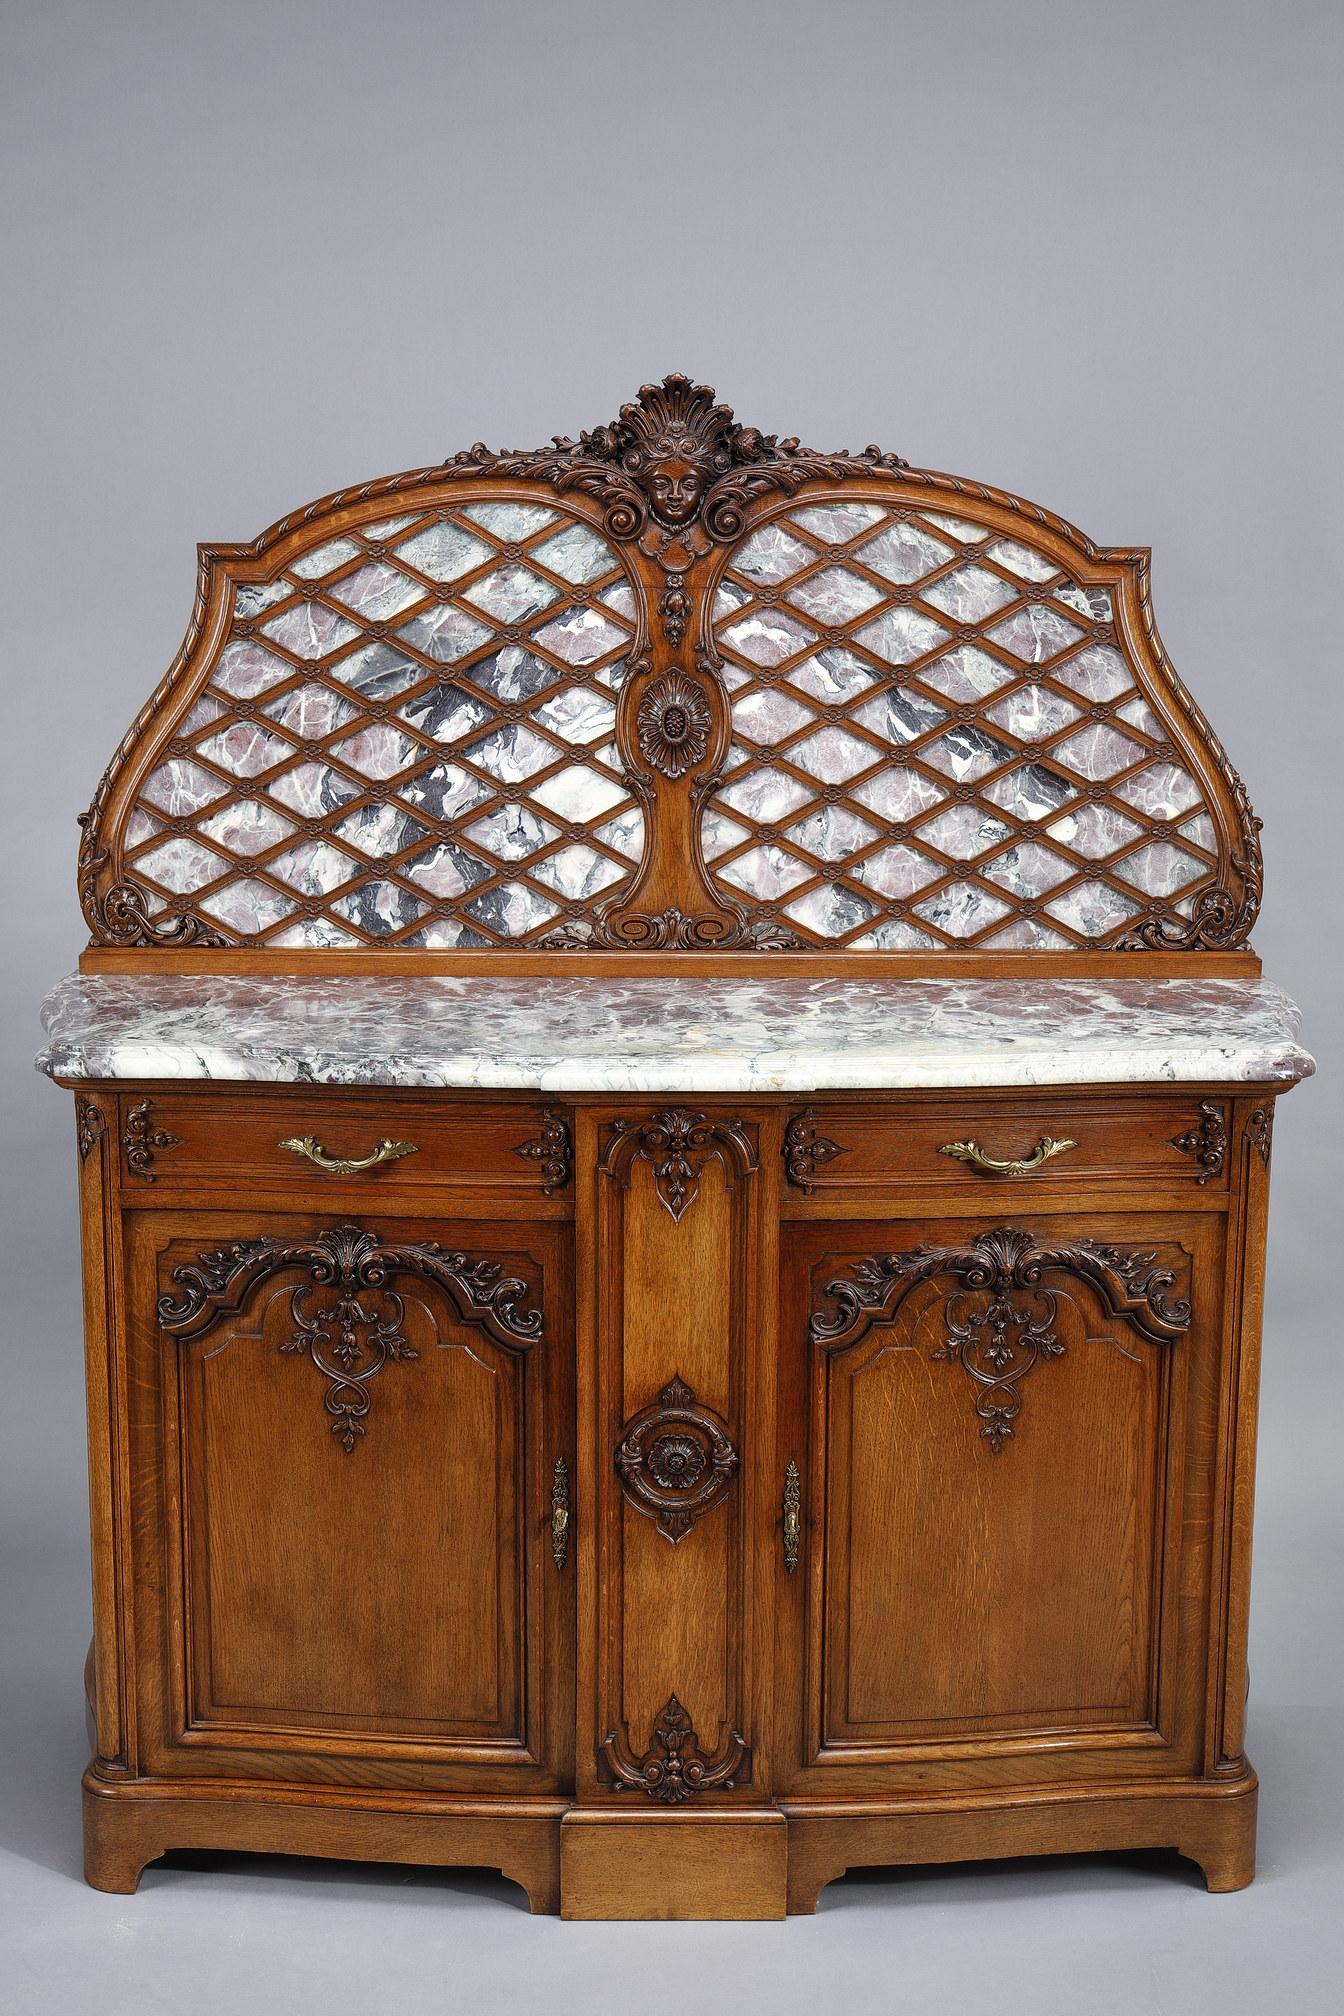 This imposing and beautiful pair of sideboards is part of a rare and important Regency-style dining room set in molded and carved oak. Breche marble top and bottom with a wooden crosspiece. This set is for sale on our website and also includes:
- a